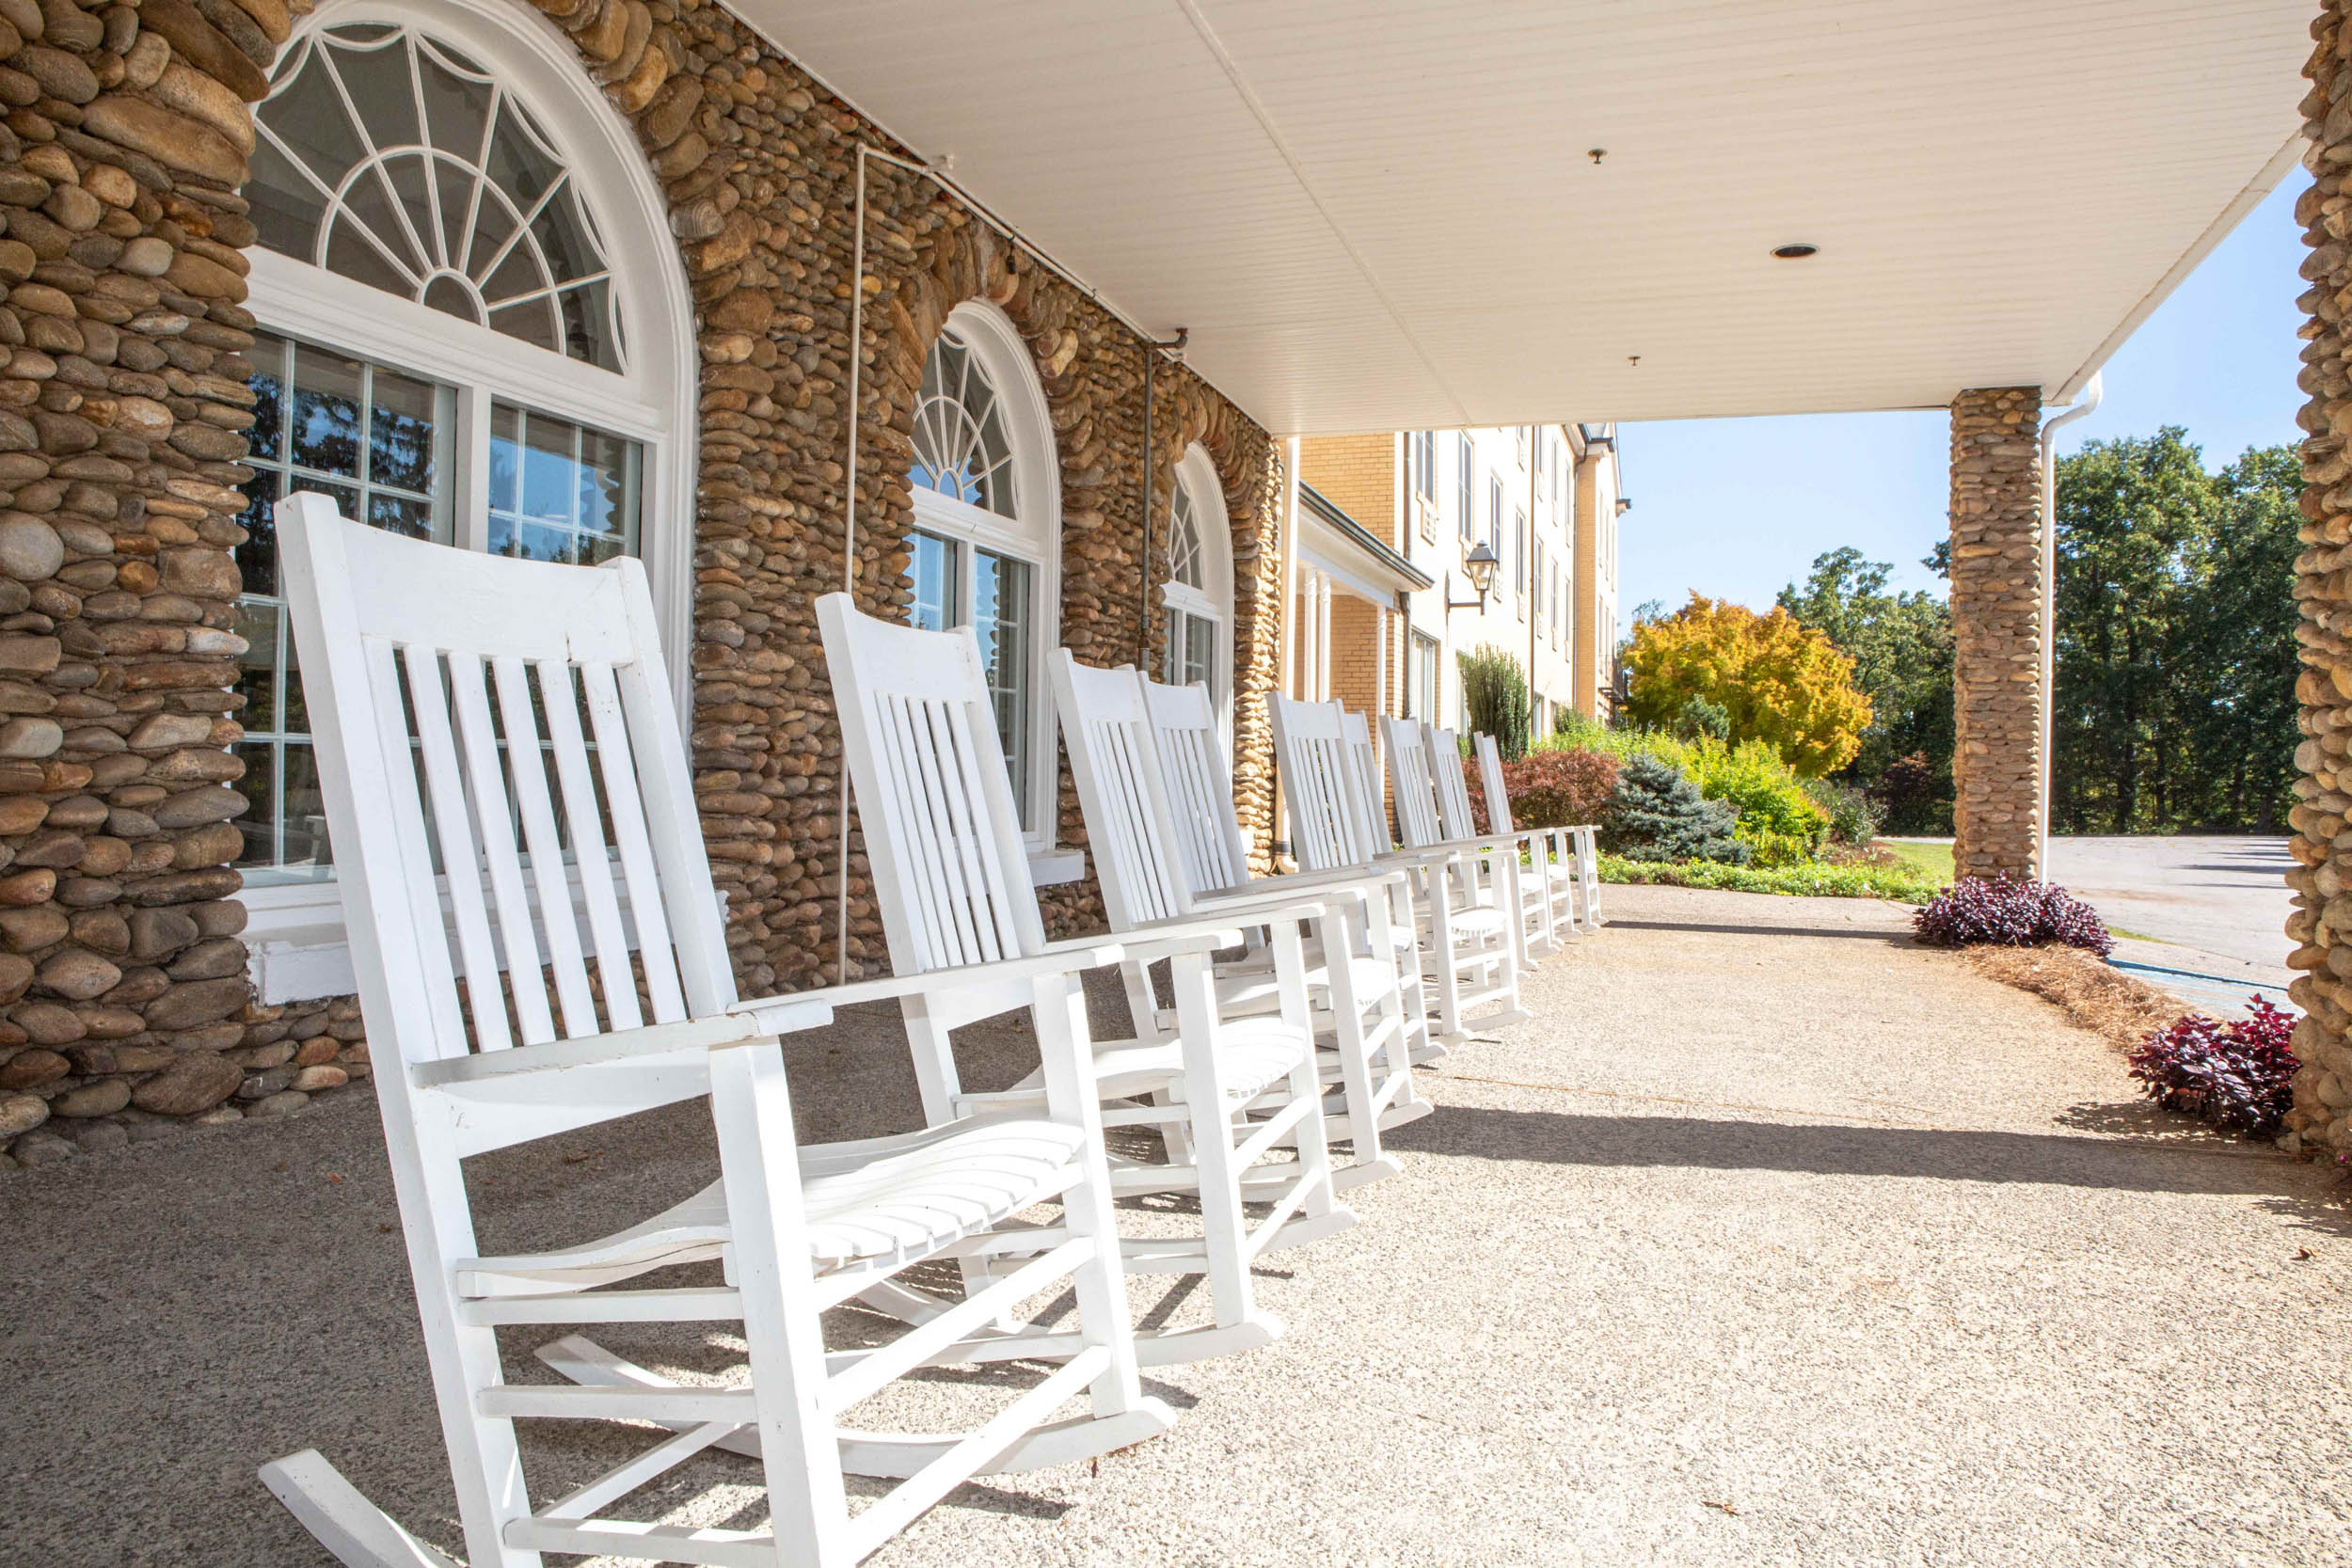 Detail of the front porch of The Lambuth Inn with a row of rocking chairs for guests